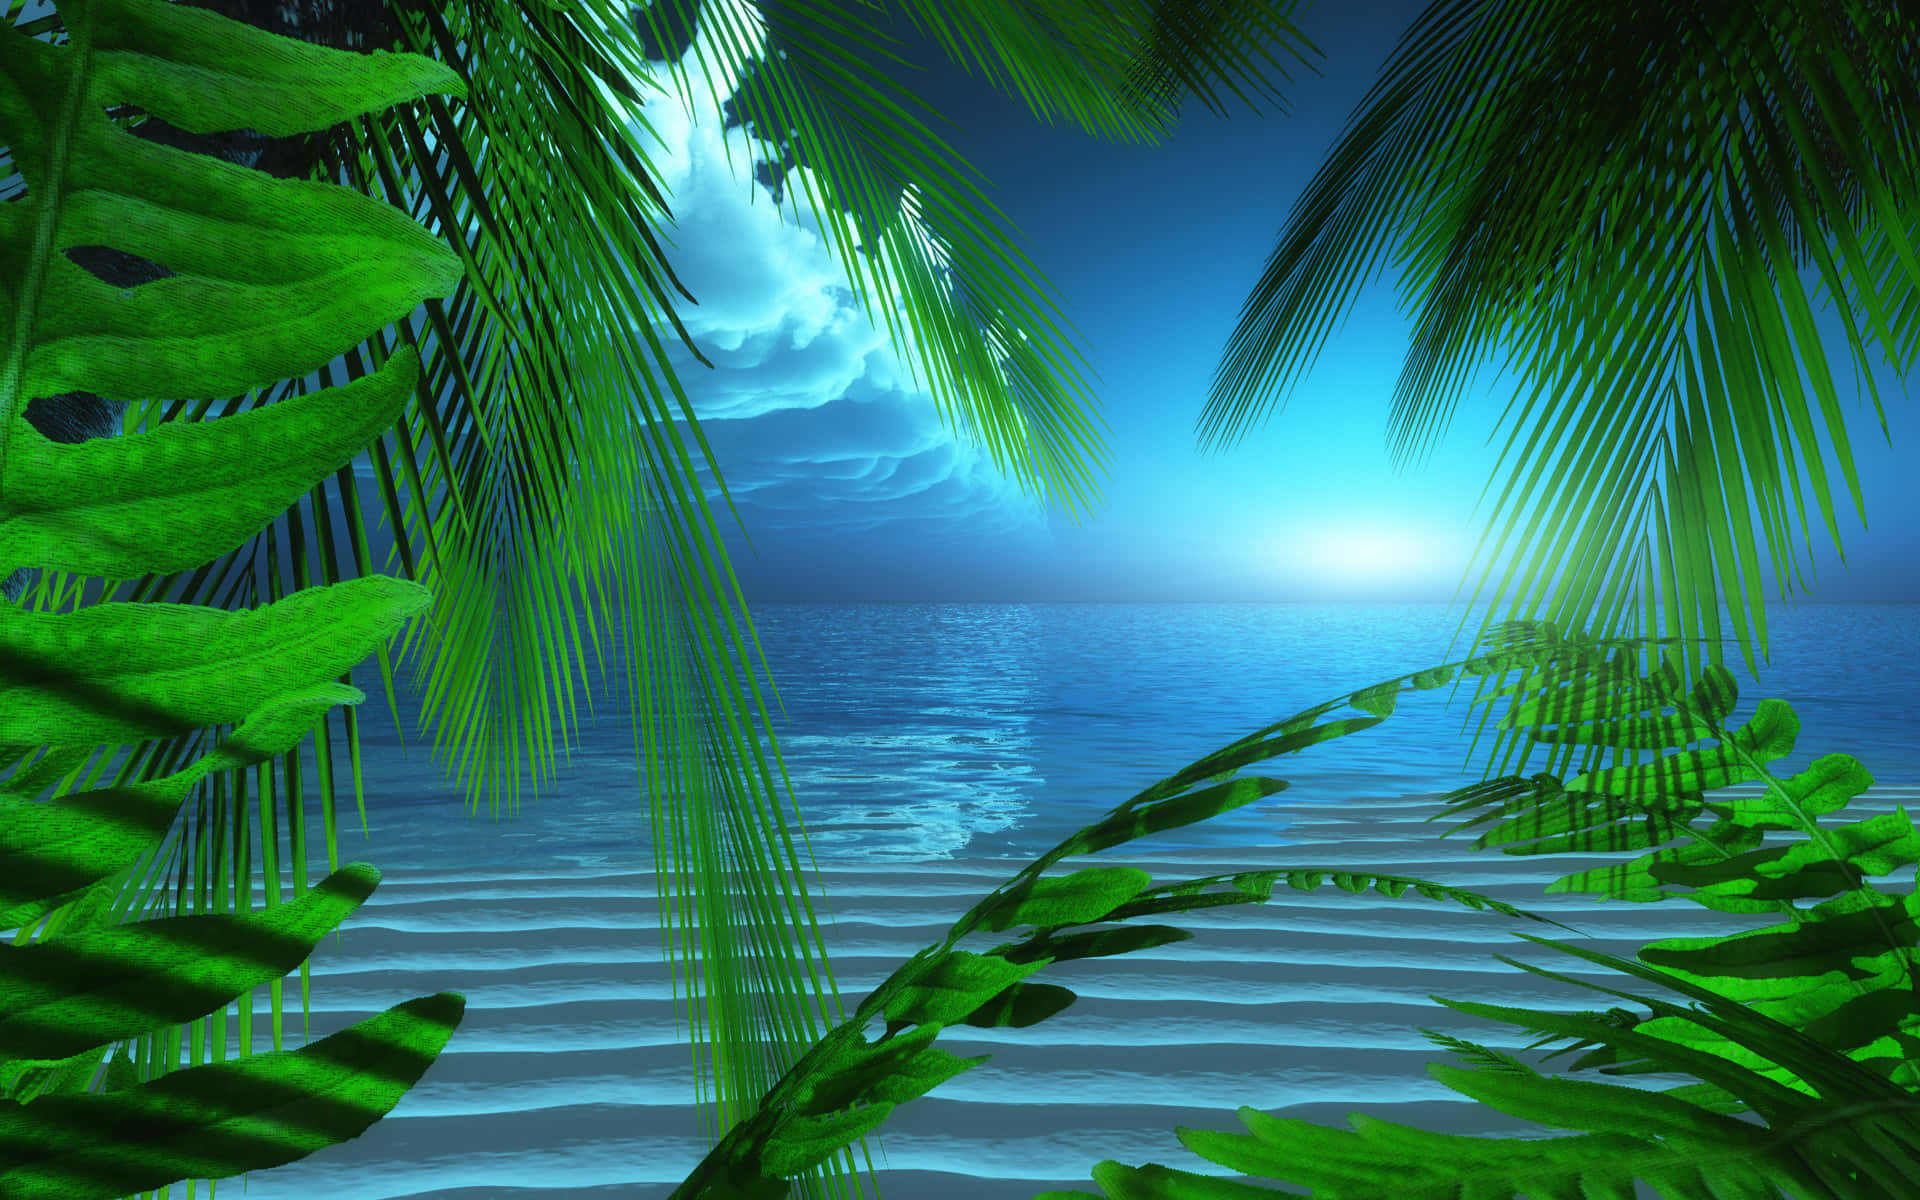 A Tropical Beach Scene With Palm Trees And Water